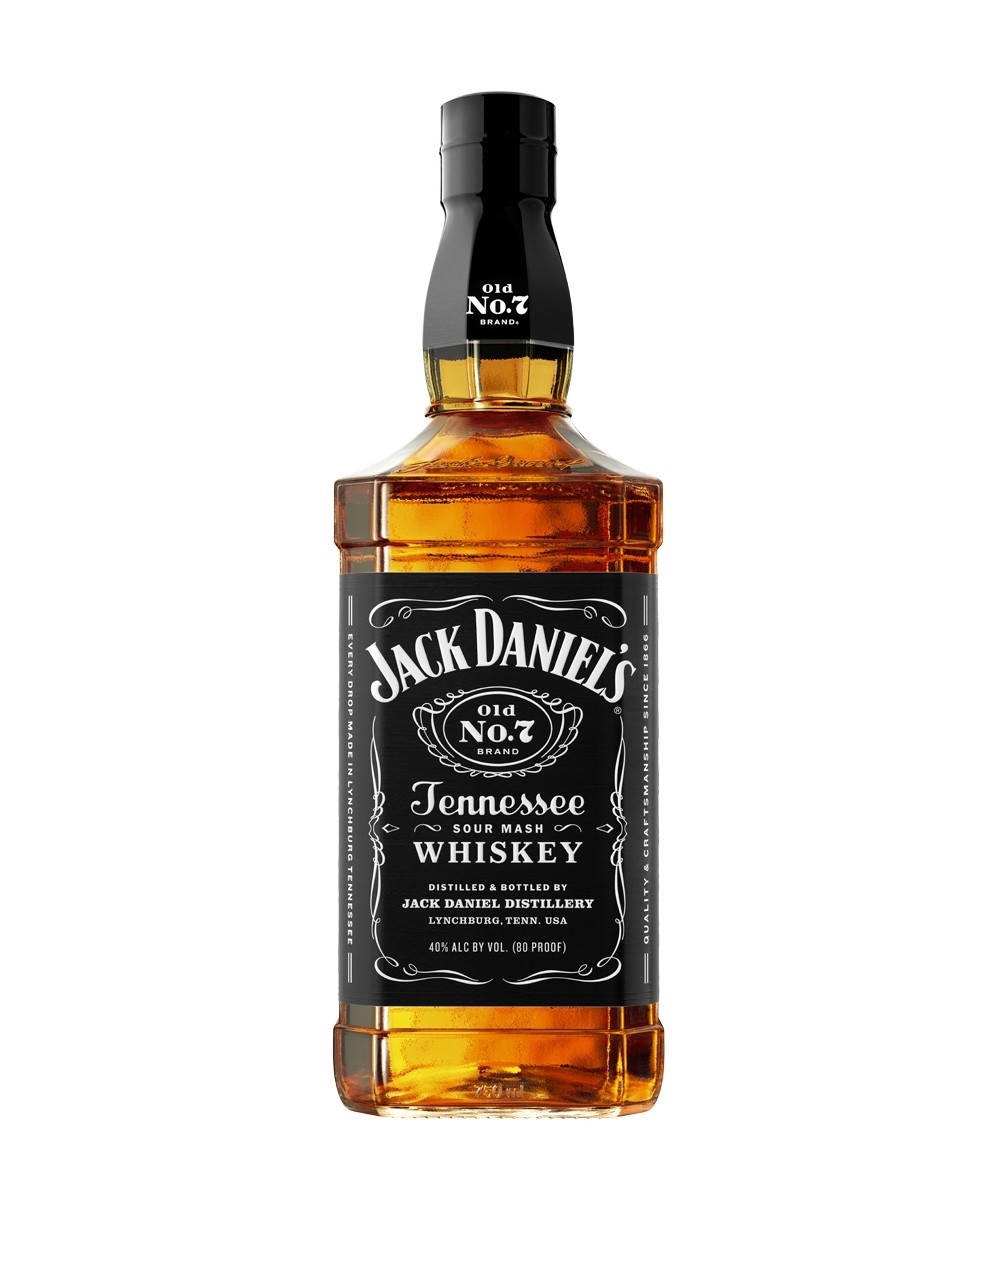 Jack Daniels Tennessee Whiskey  Buy Online or Send as a Gift  ReserveBar